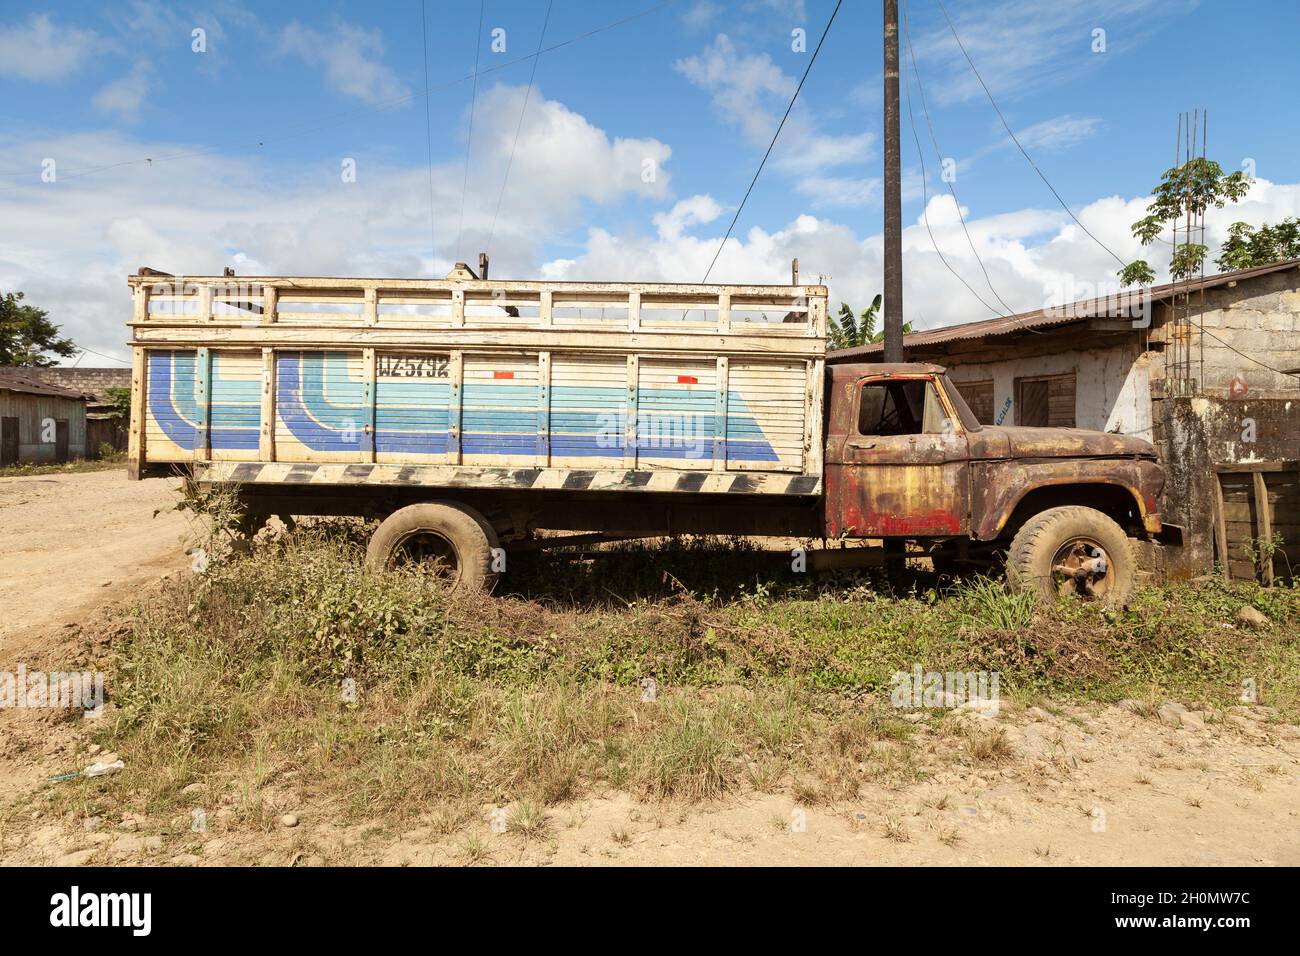 Pilcopata, Peru - April 12, 2014: An old, rusty and abandoned big truck, with veiled crystals, rests in the surroundings of the small town of Pilcopat Stock Photo